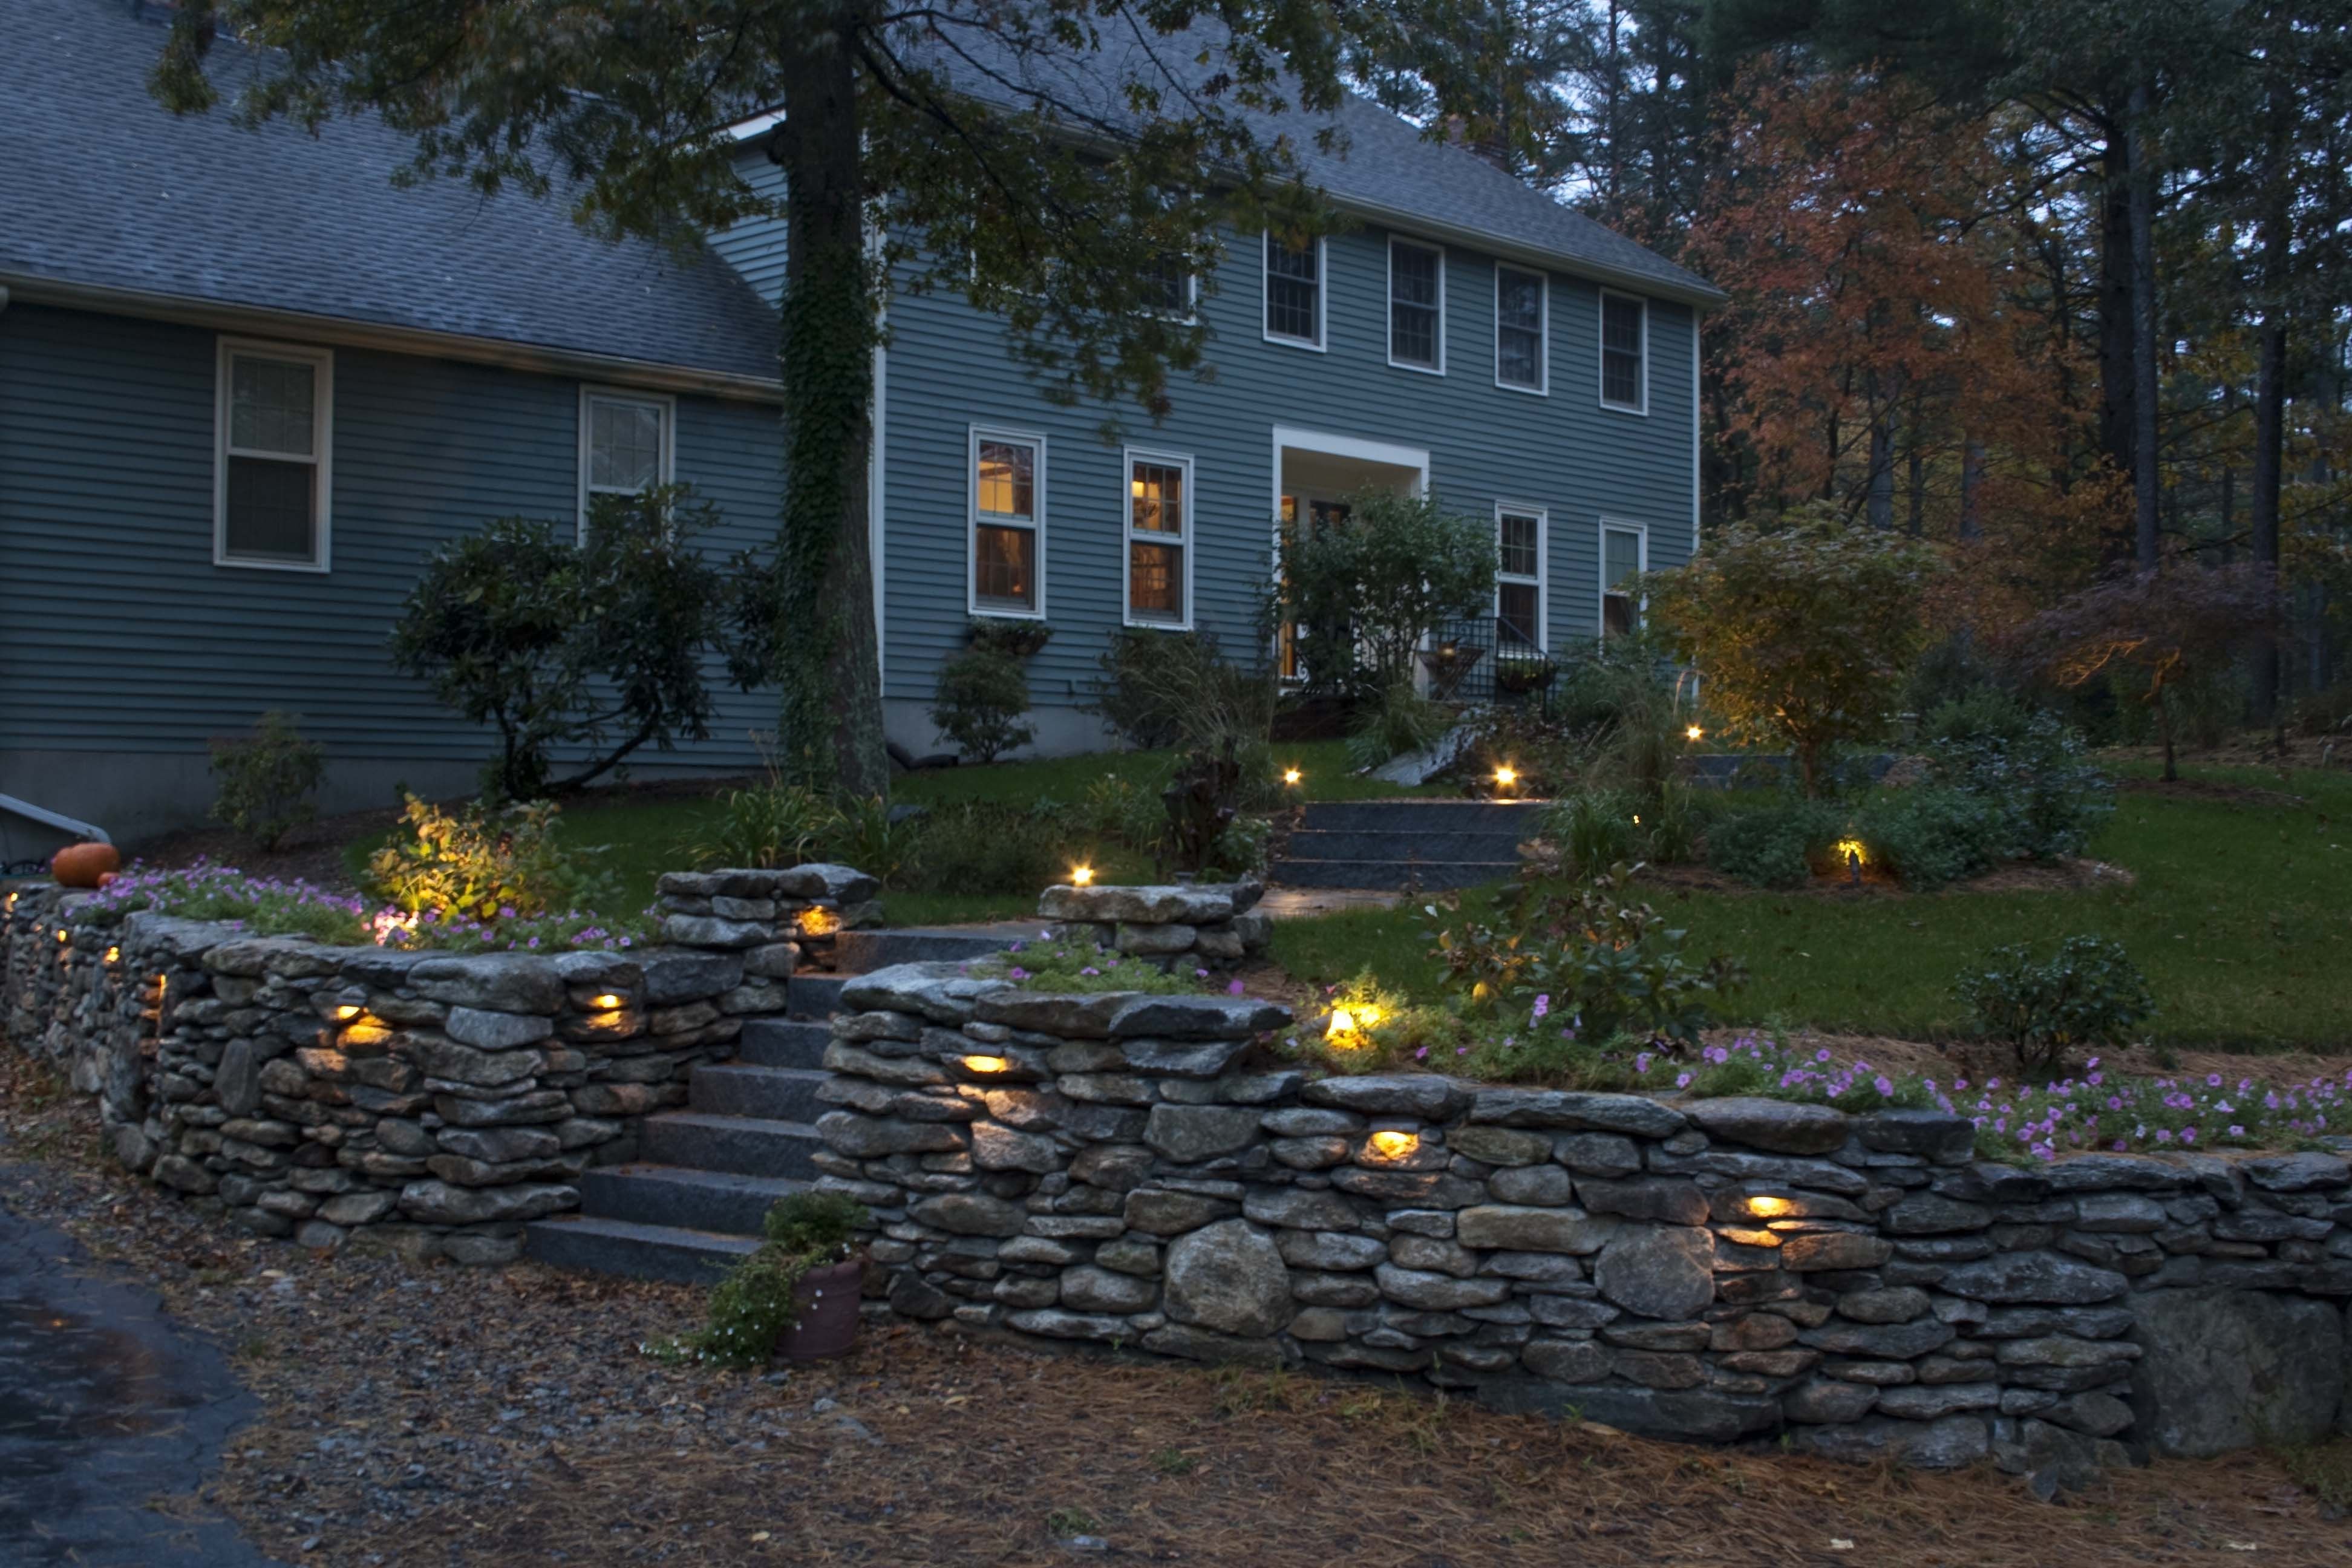 10 Steps For Choosing Retaining Wall Lights | Warisan Lighting Regarding Outdoor Retaining Wall Lighting (View 11 of 15)